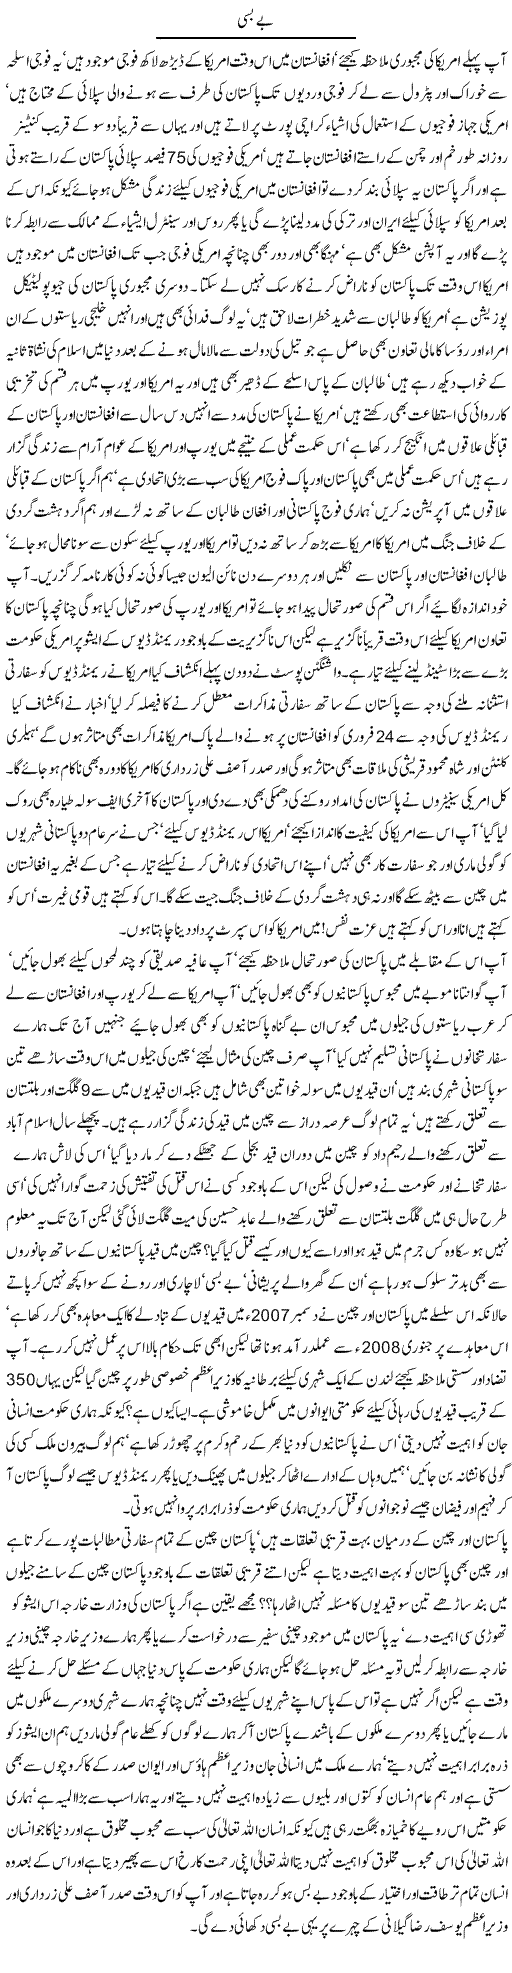 Countering America Express Column Javed Chaudhry 10 February 2011